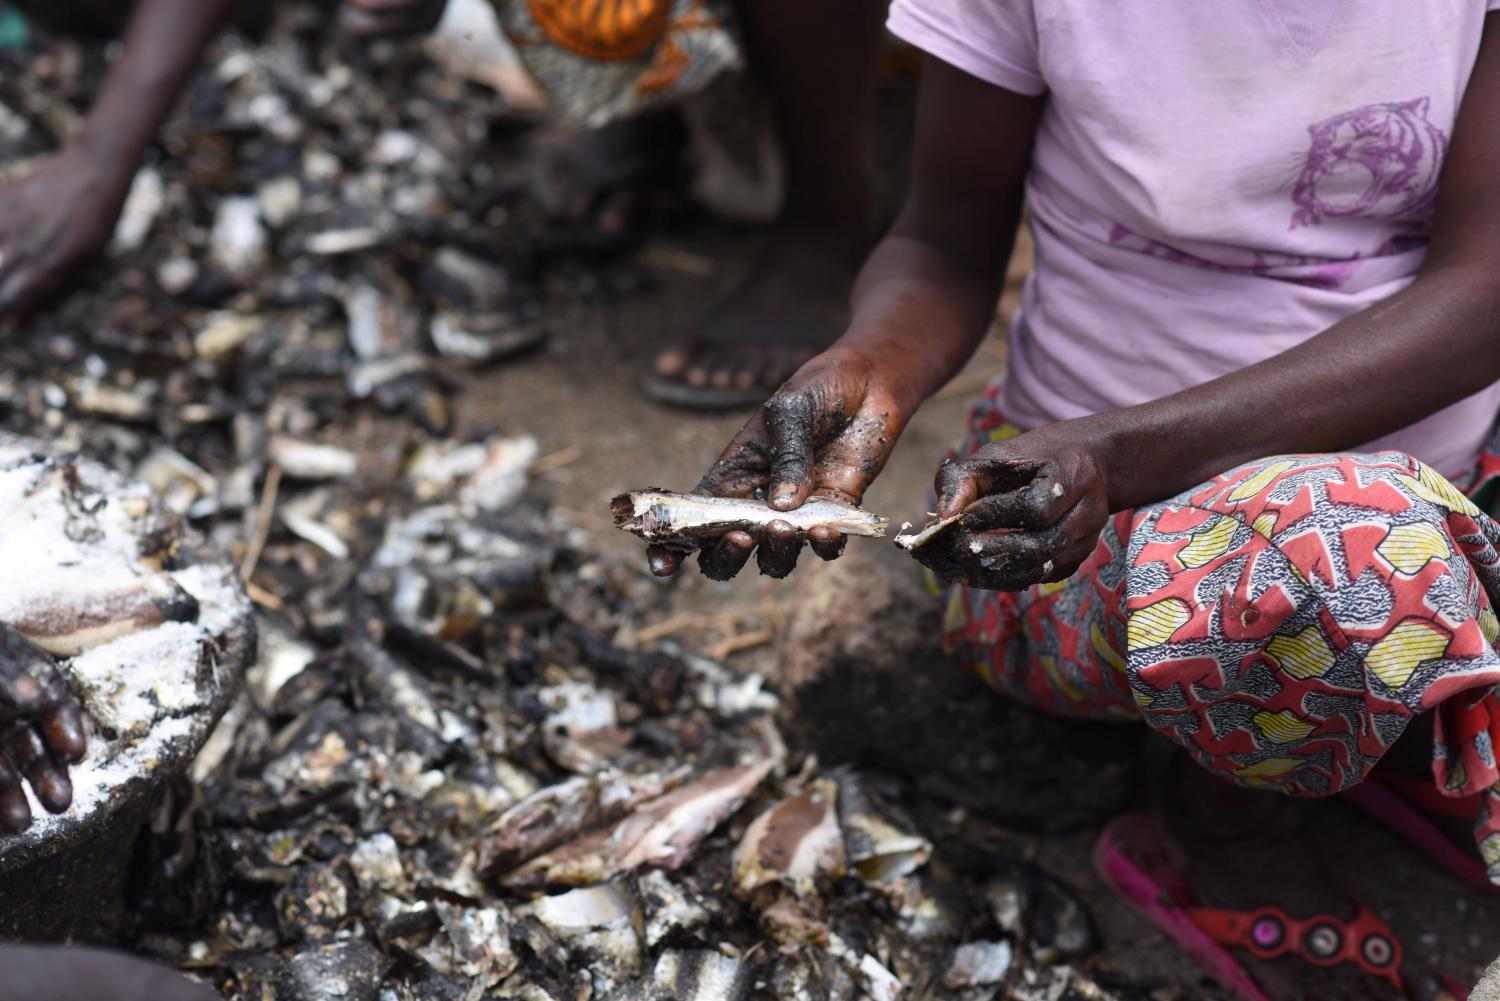 Women apply salt to dried fish at an artisanal fish processing facility in the Senegalese coastal town of Joal-Fadiouth, April 10, 2018. Picture taken April 10, 2018.   To match Special Report OCEANS-TIDE/SARDINELLA   REUTERS/Sylvain Cherkaoui - RC1E49820D10